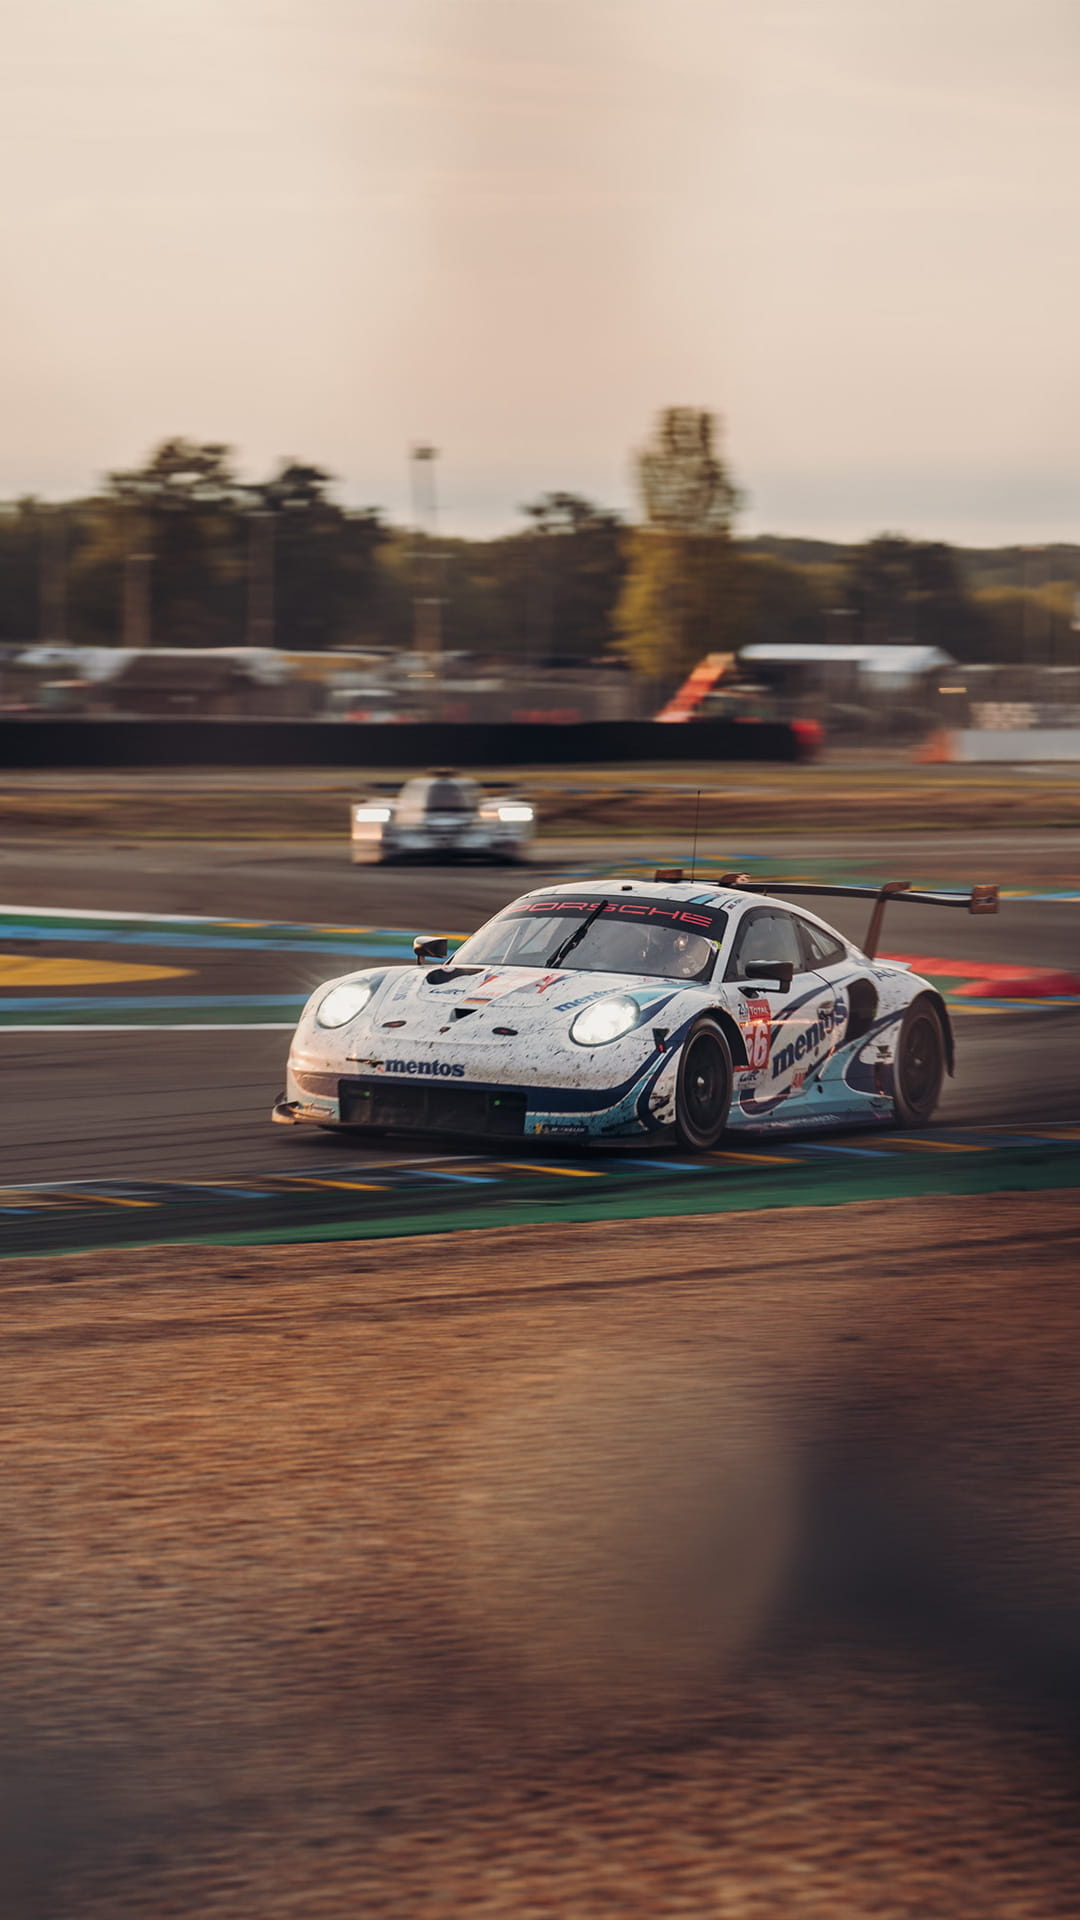 Auto Racing: GT cars, Motorsport, GTE-Pro class at the 24 Hours of Le Mans. 1080x1920 Full HD Wallpaper.